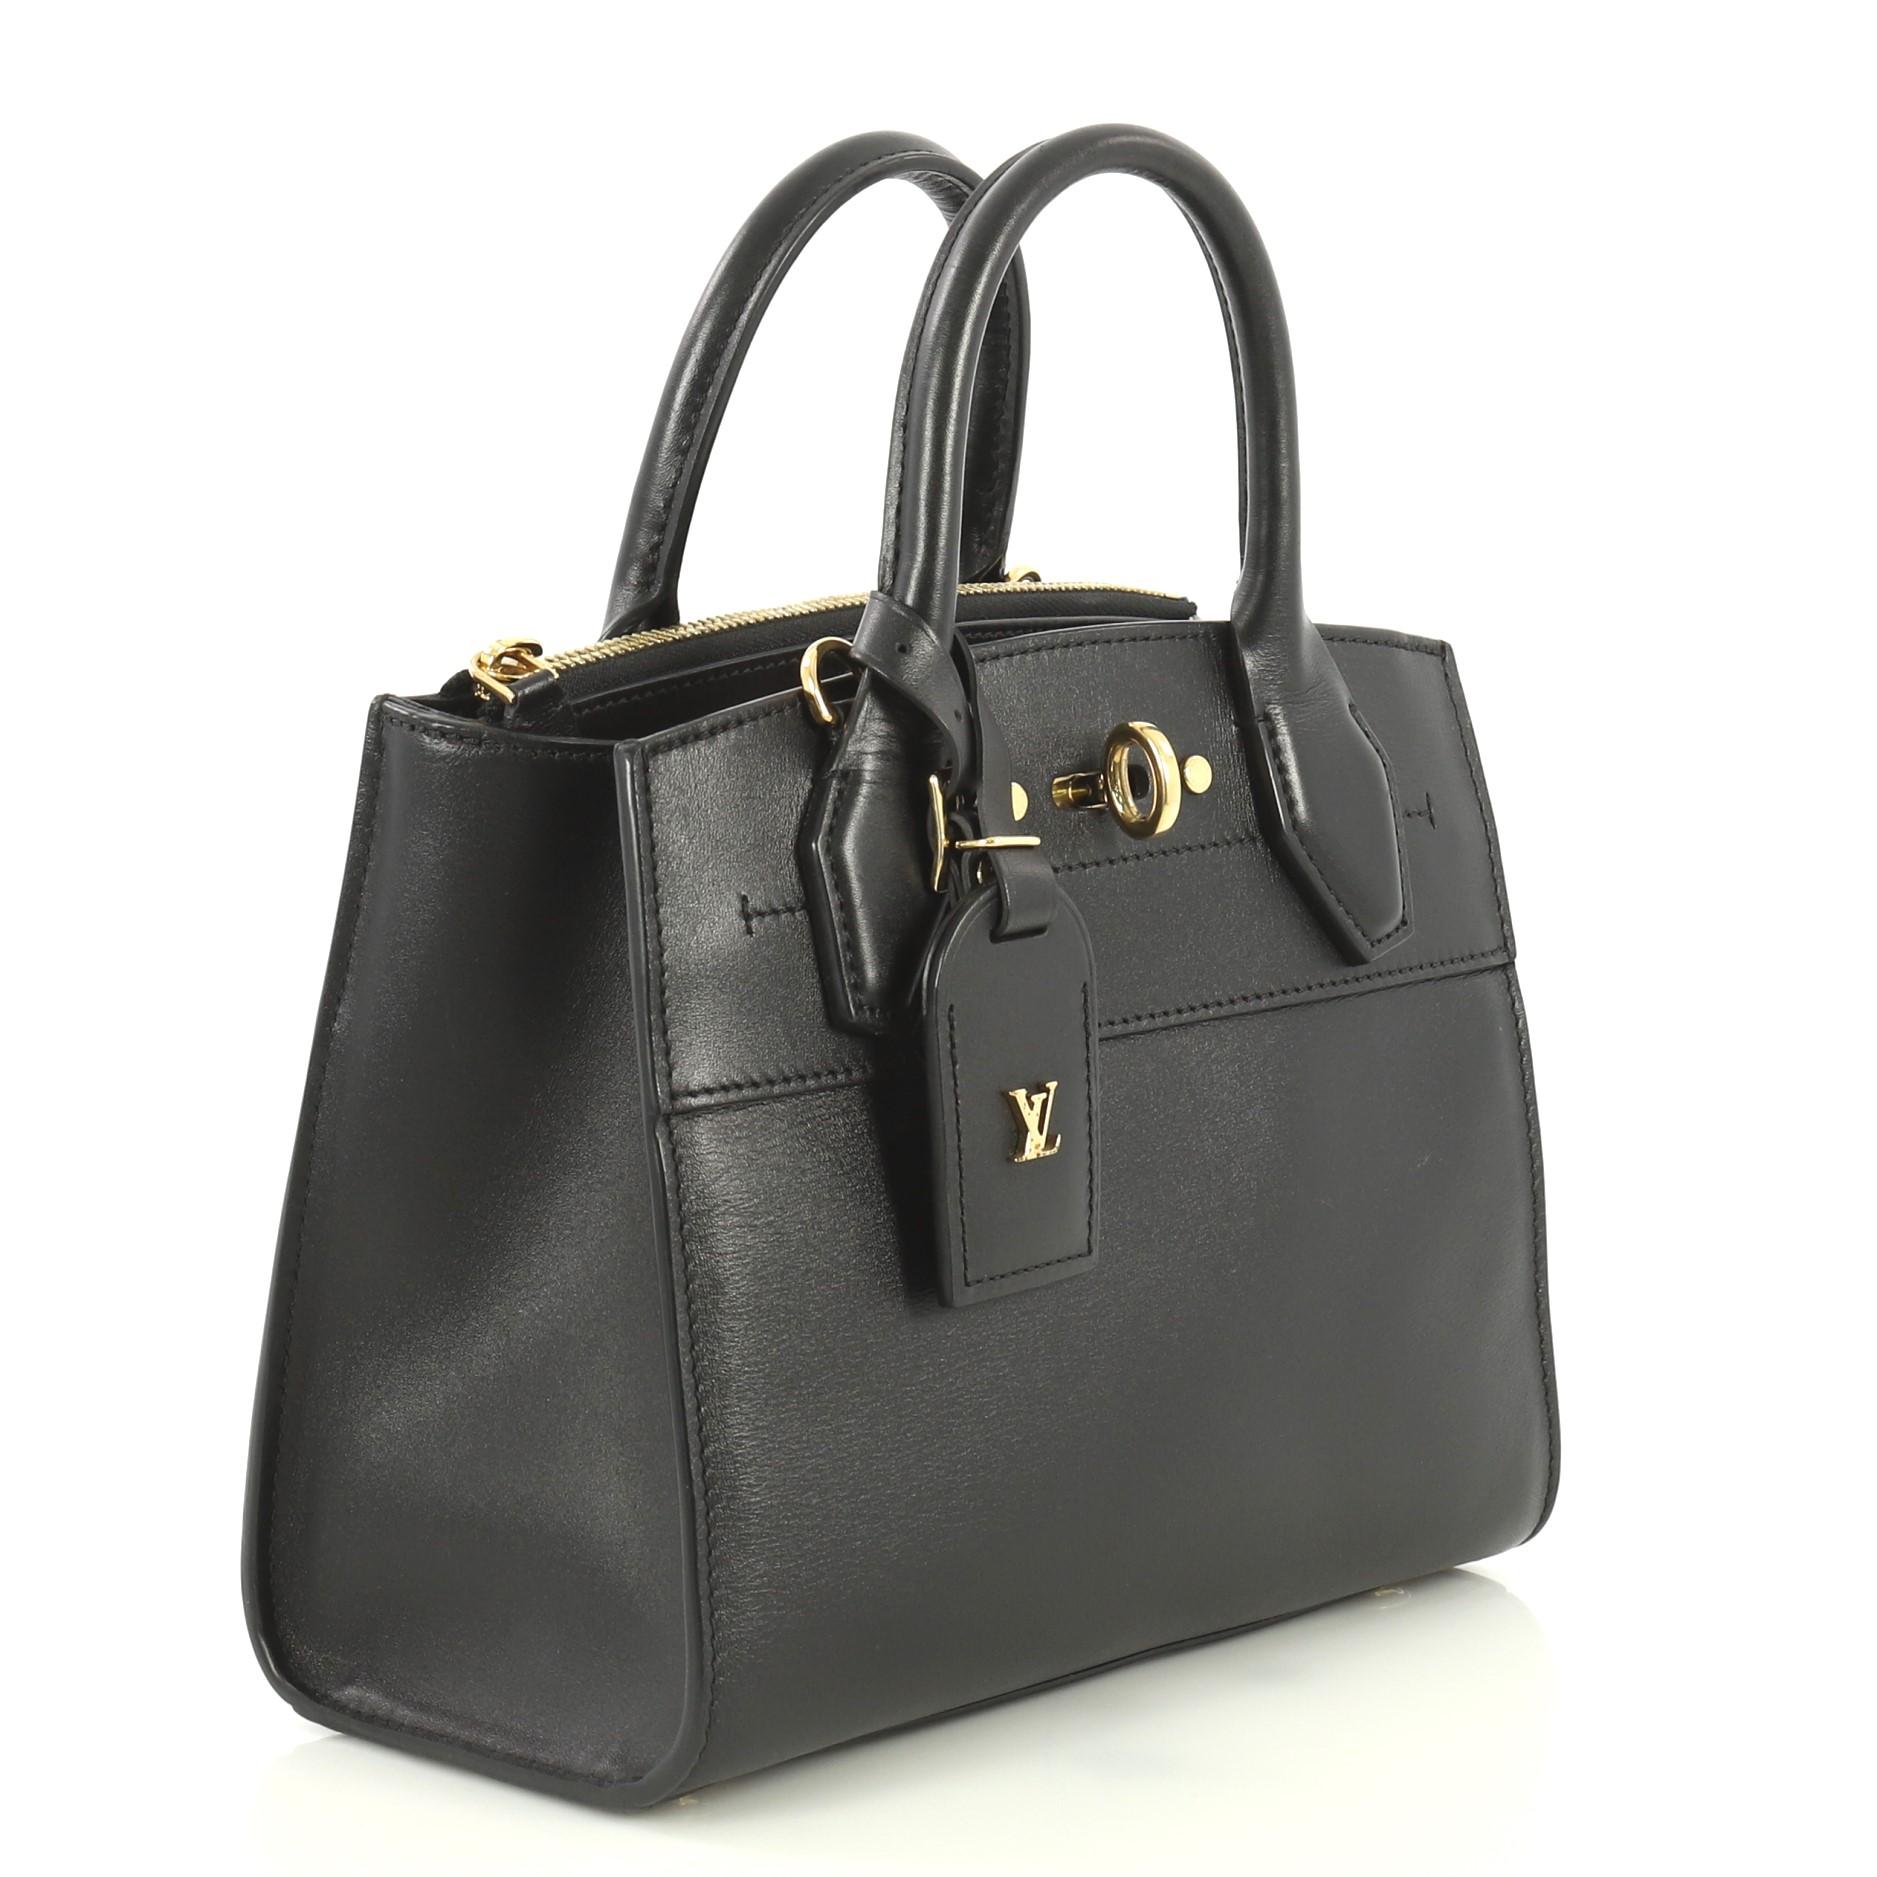 This Louis Vuitton City Steamer Handbag Leather Mini, crafted in black leather, features dual rolled leather handles, front central lock with LV stamped logo, and gold-tone hardware. It opens to a black leather interior with rear zip compartment and